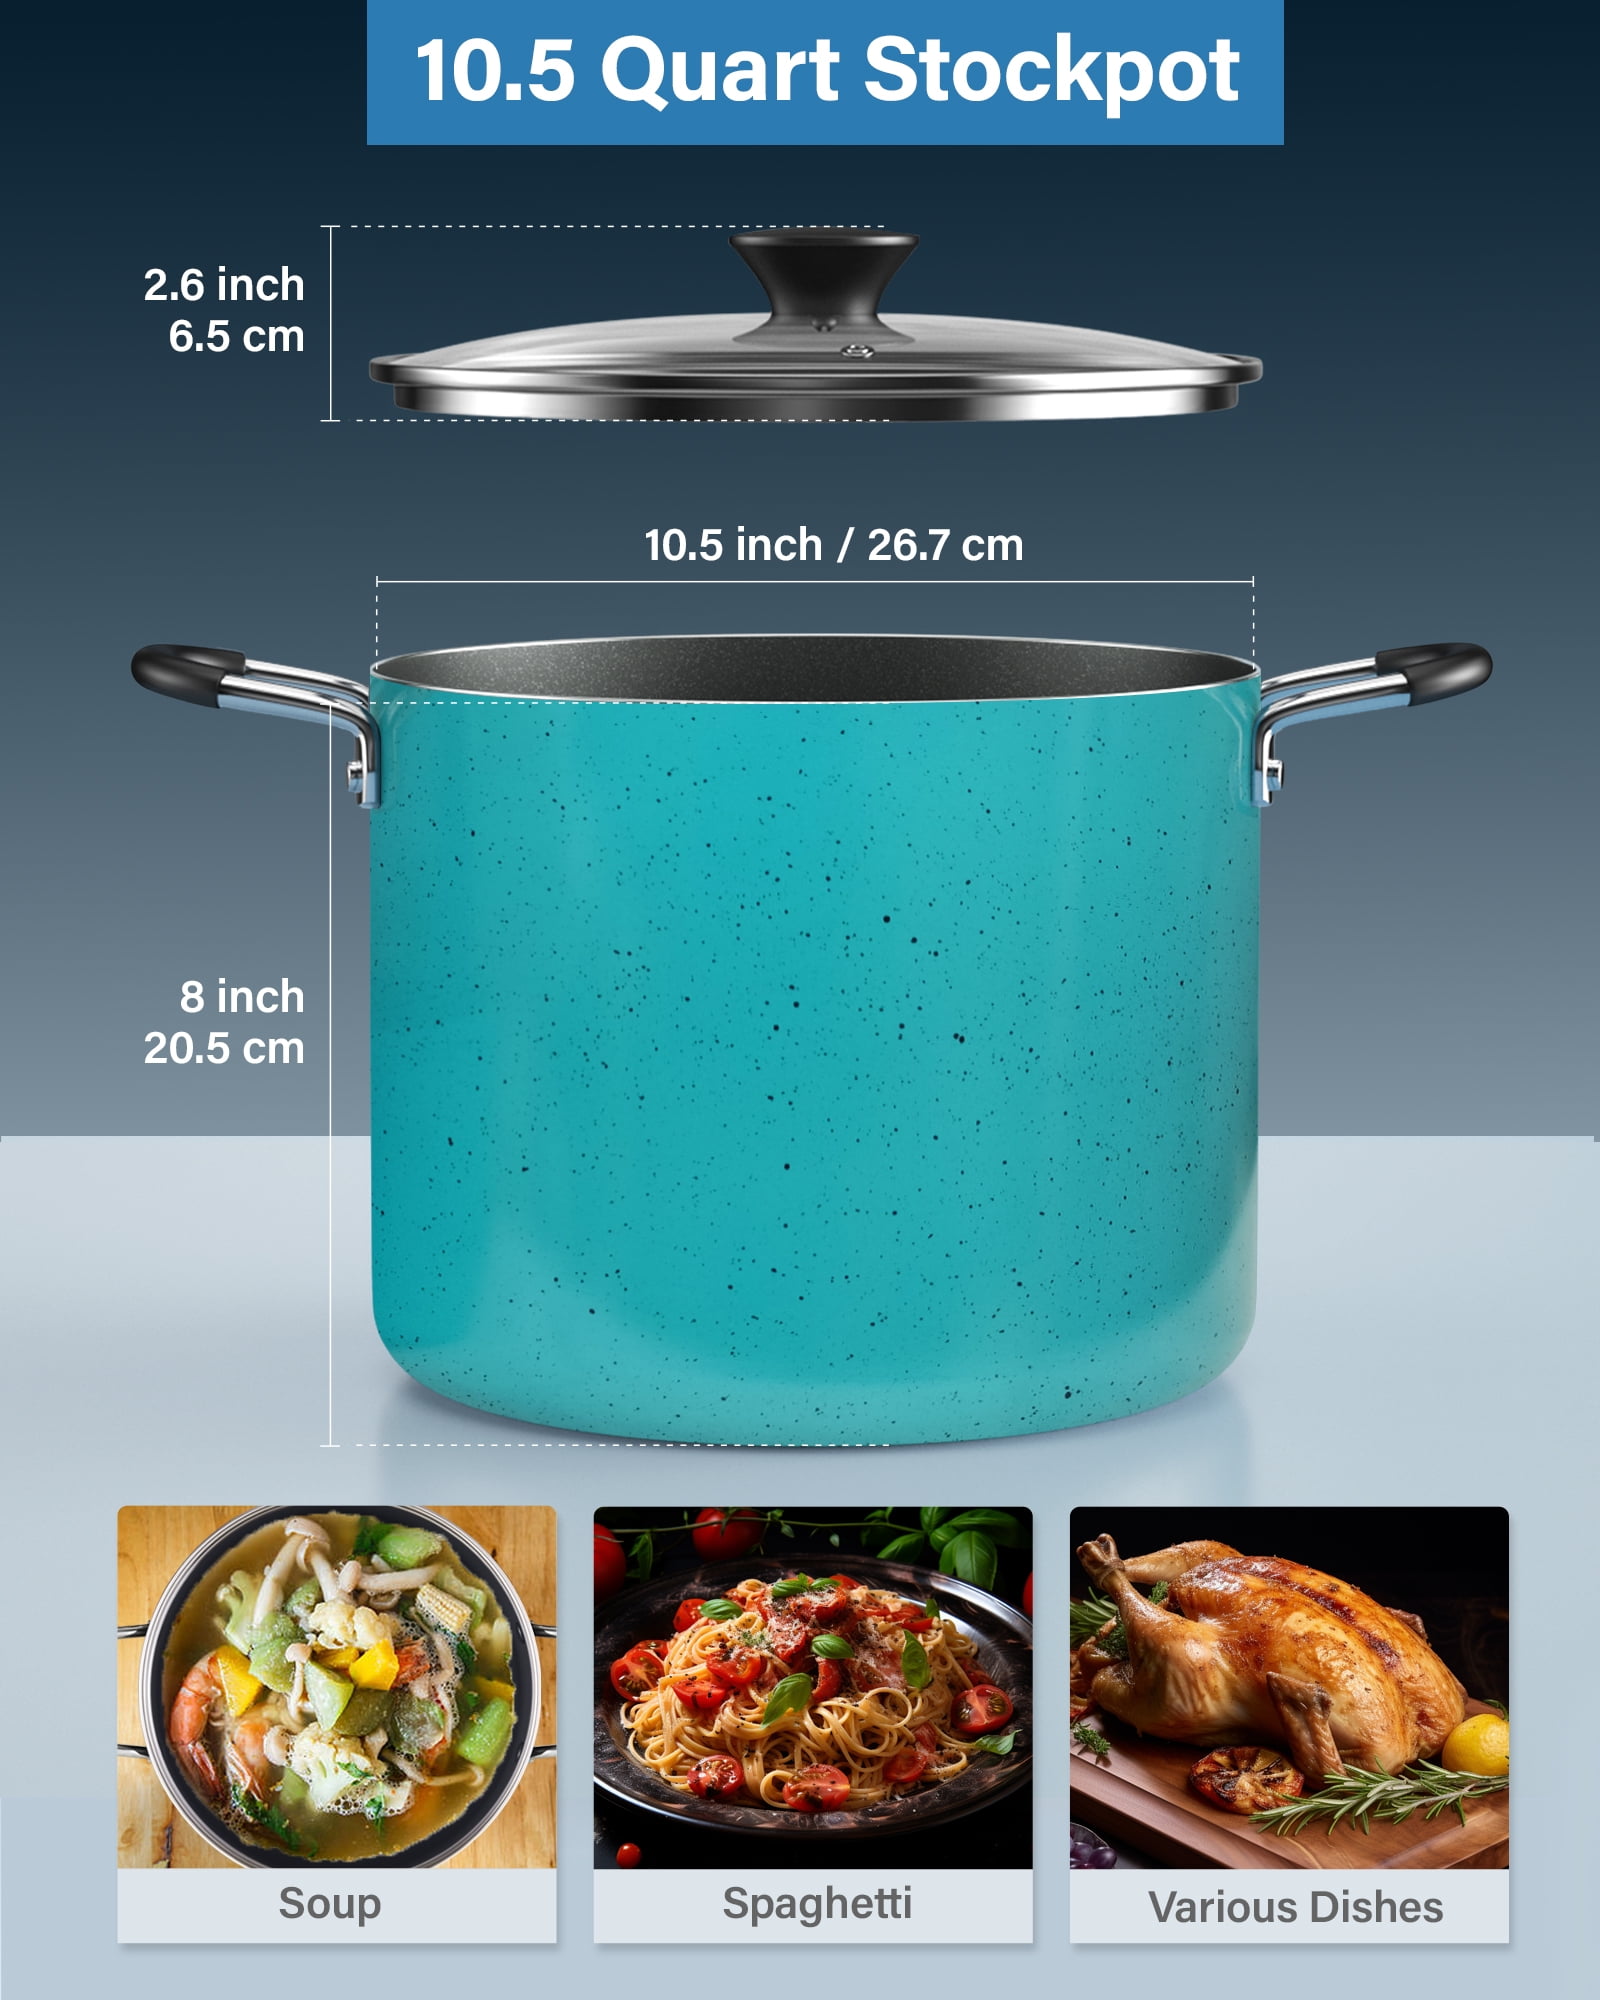 Cook N Home 02730 10 Quart Hard Anodized Nonstick Stockpot with Lid